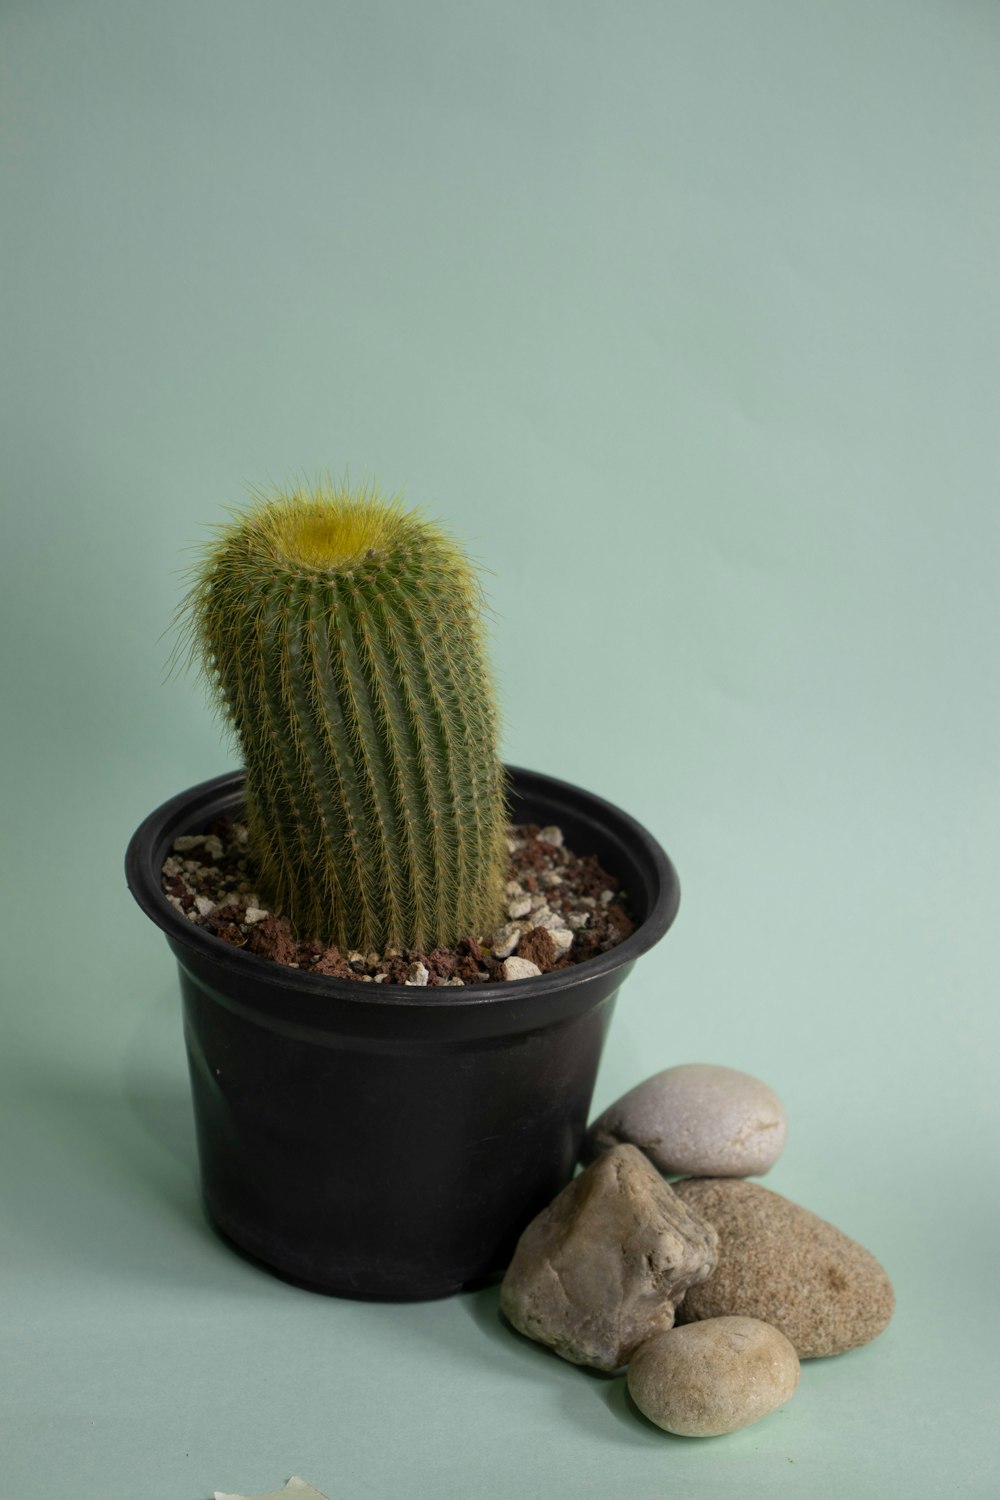 a small cactus in a black pot next to rocks